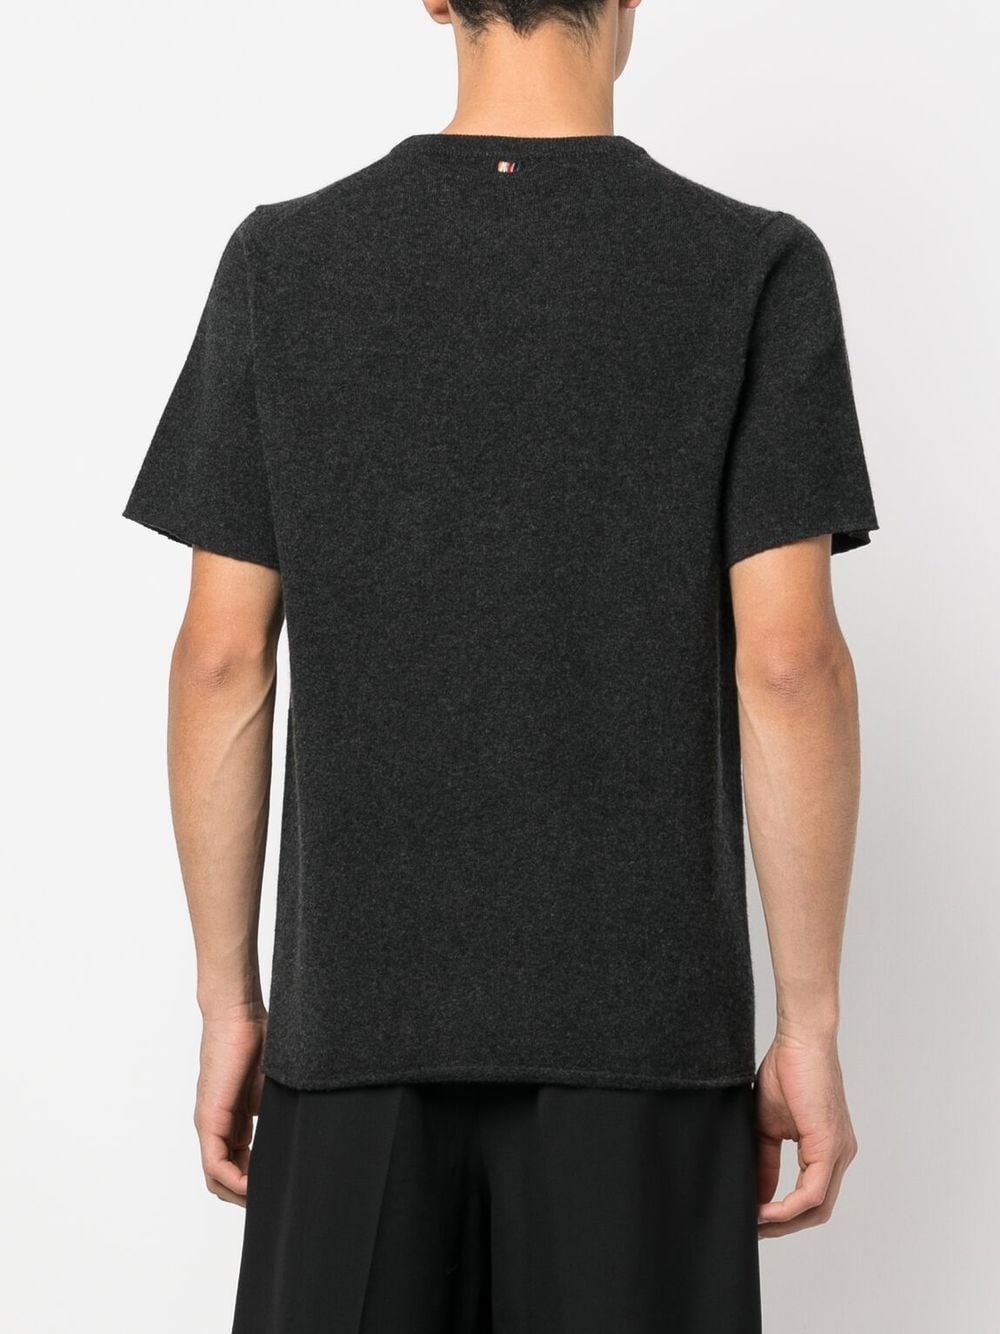 crew-neck knitted T-shirt - 4